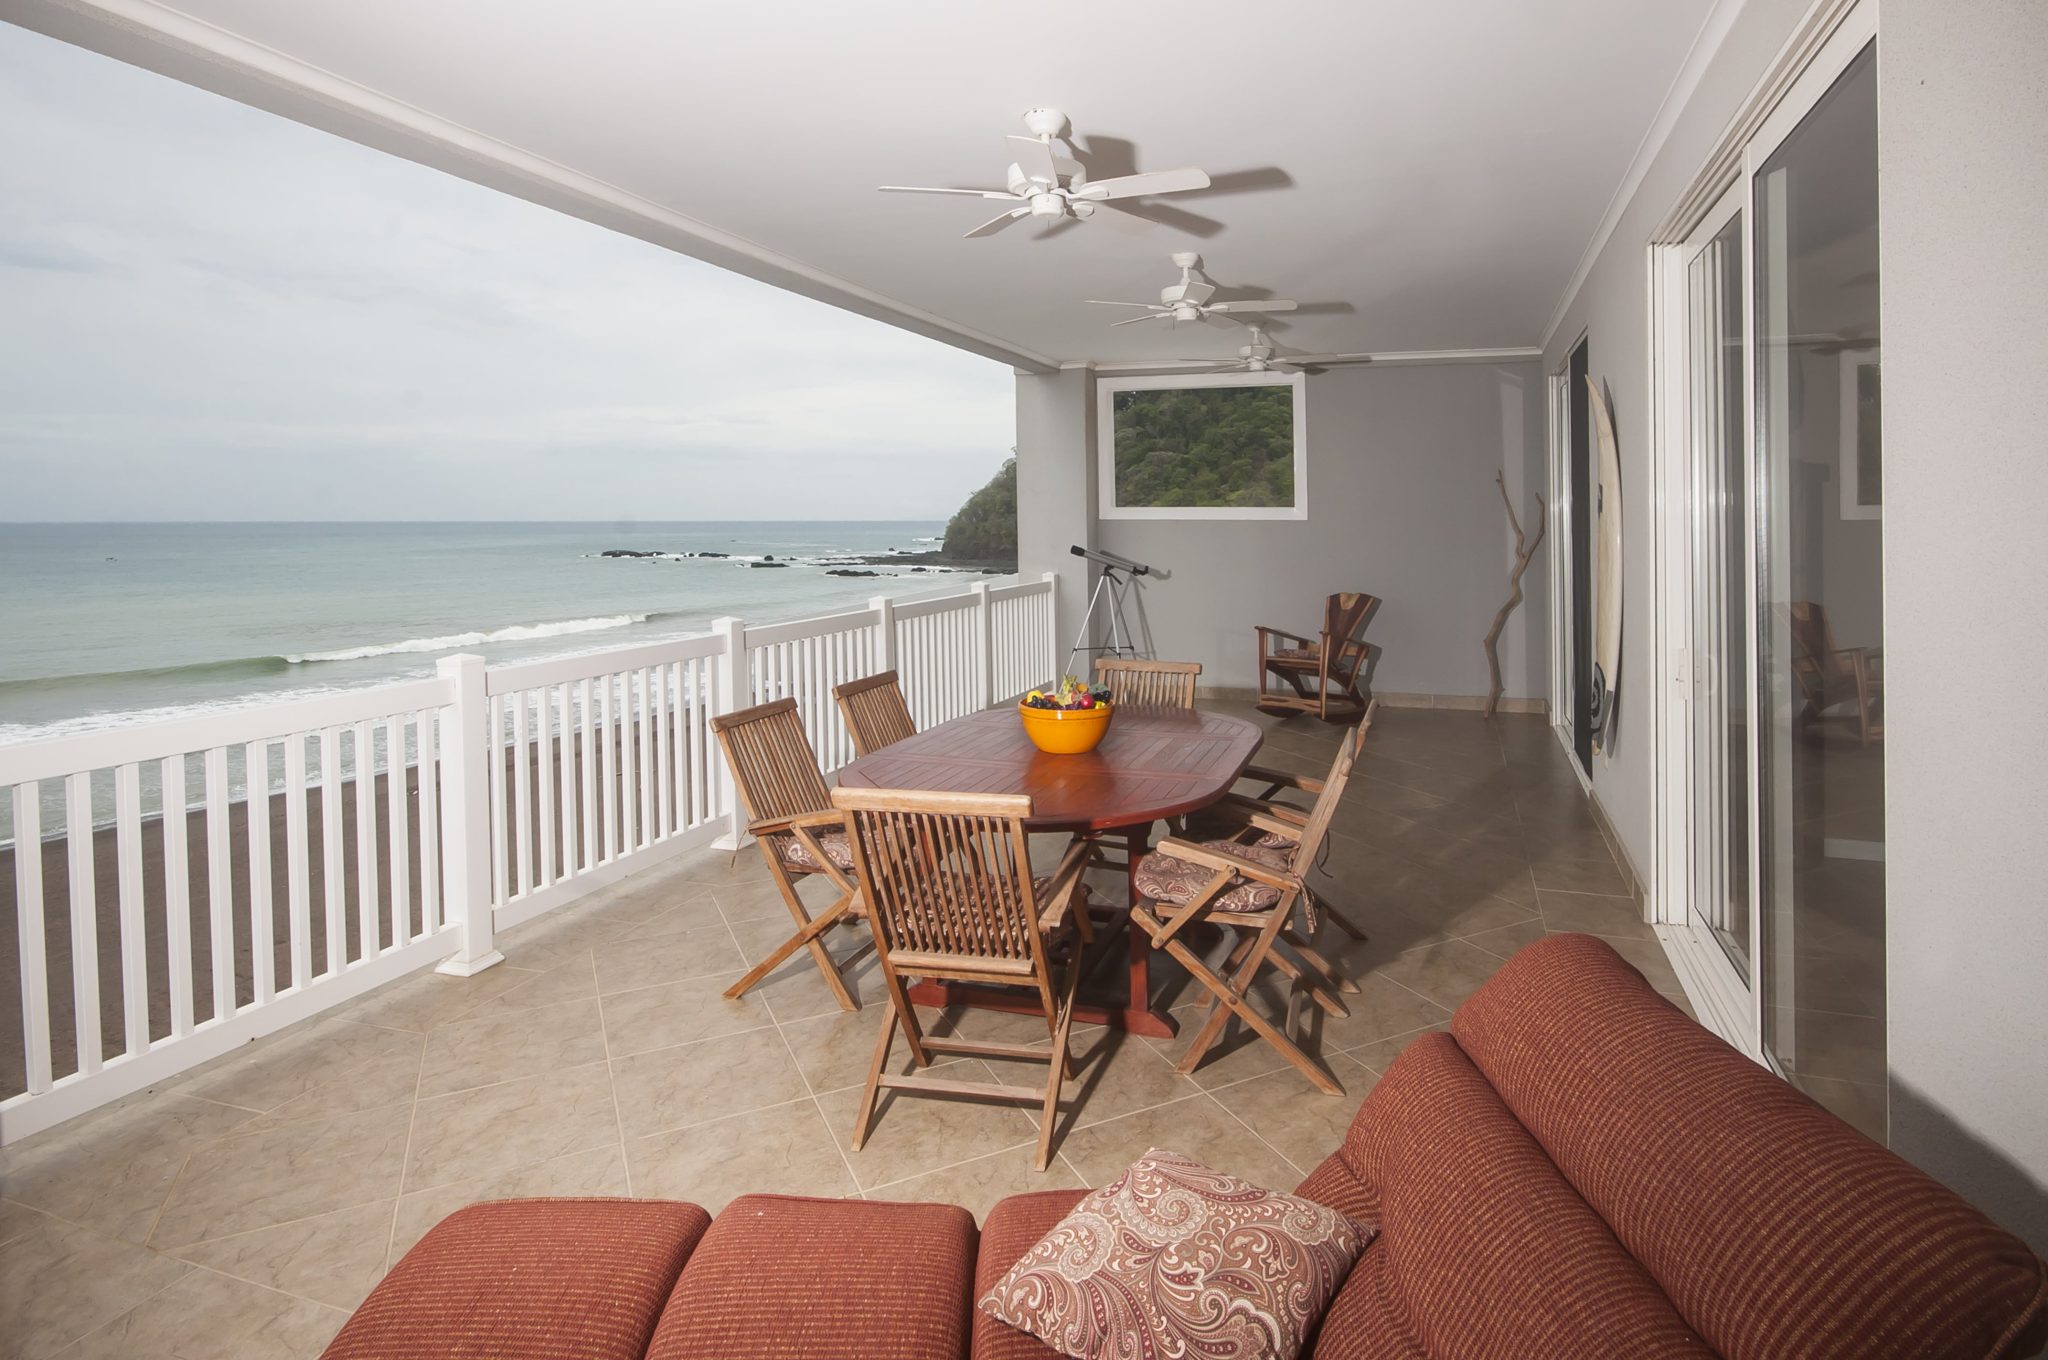 CONDO - 5 Bedroom Luxury Penthouse Ocean View Beachfront Condo With Great Rental Income!!!